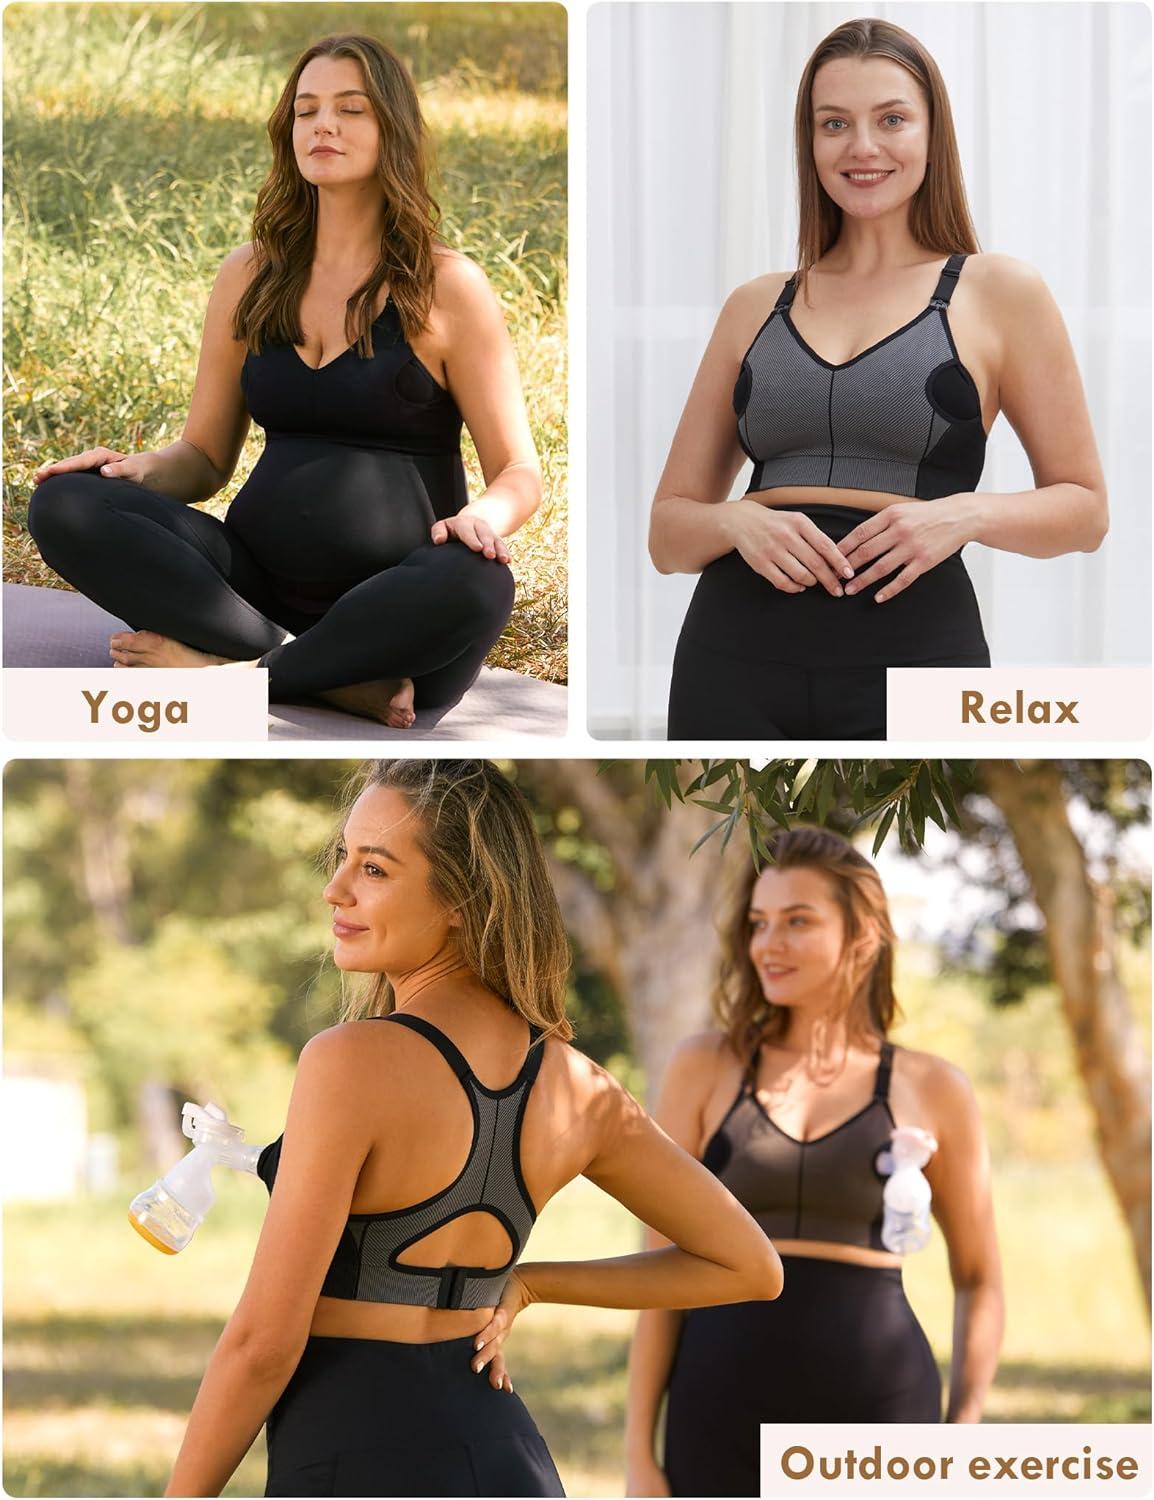 2pcs Women High Support Sports Bra Yoga Racerback Activewear with